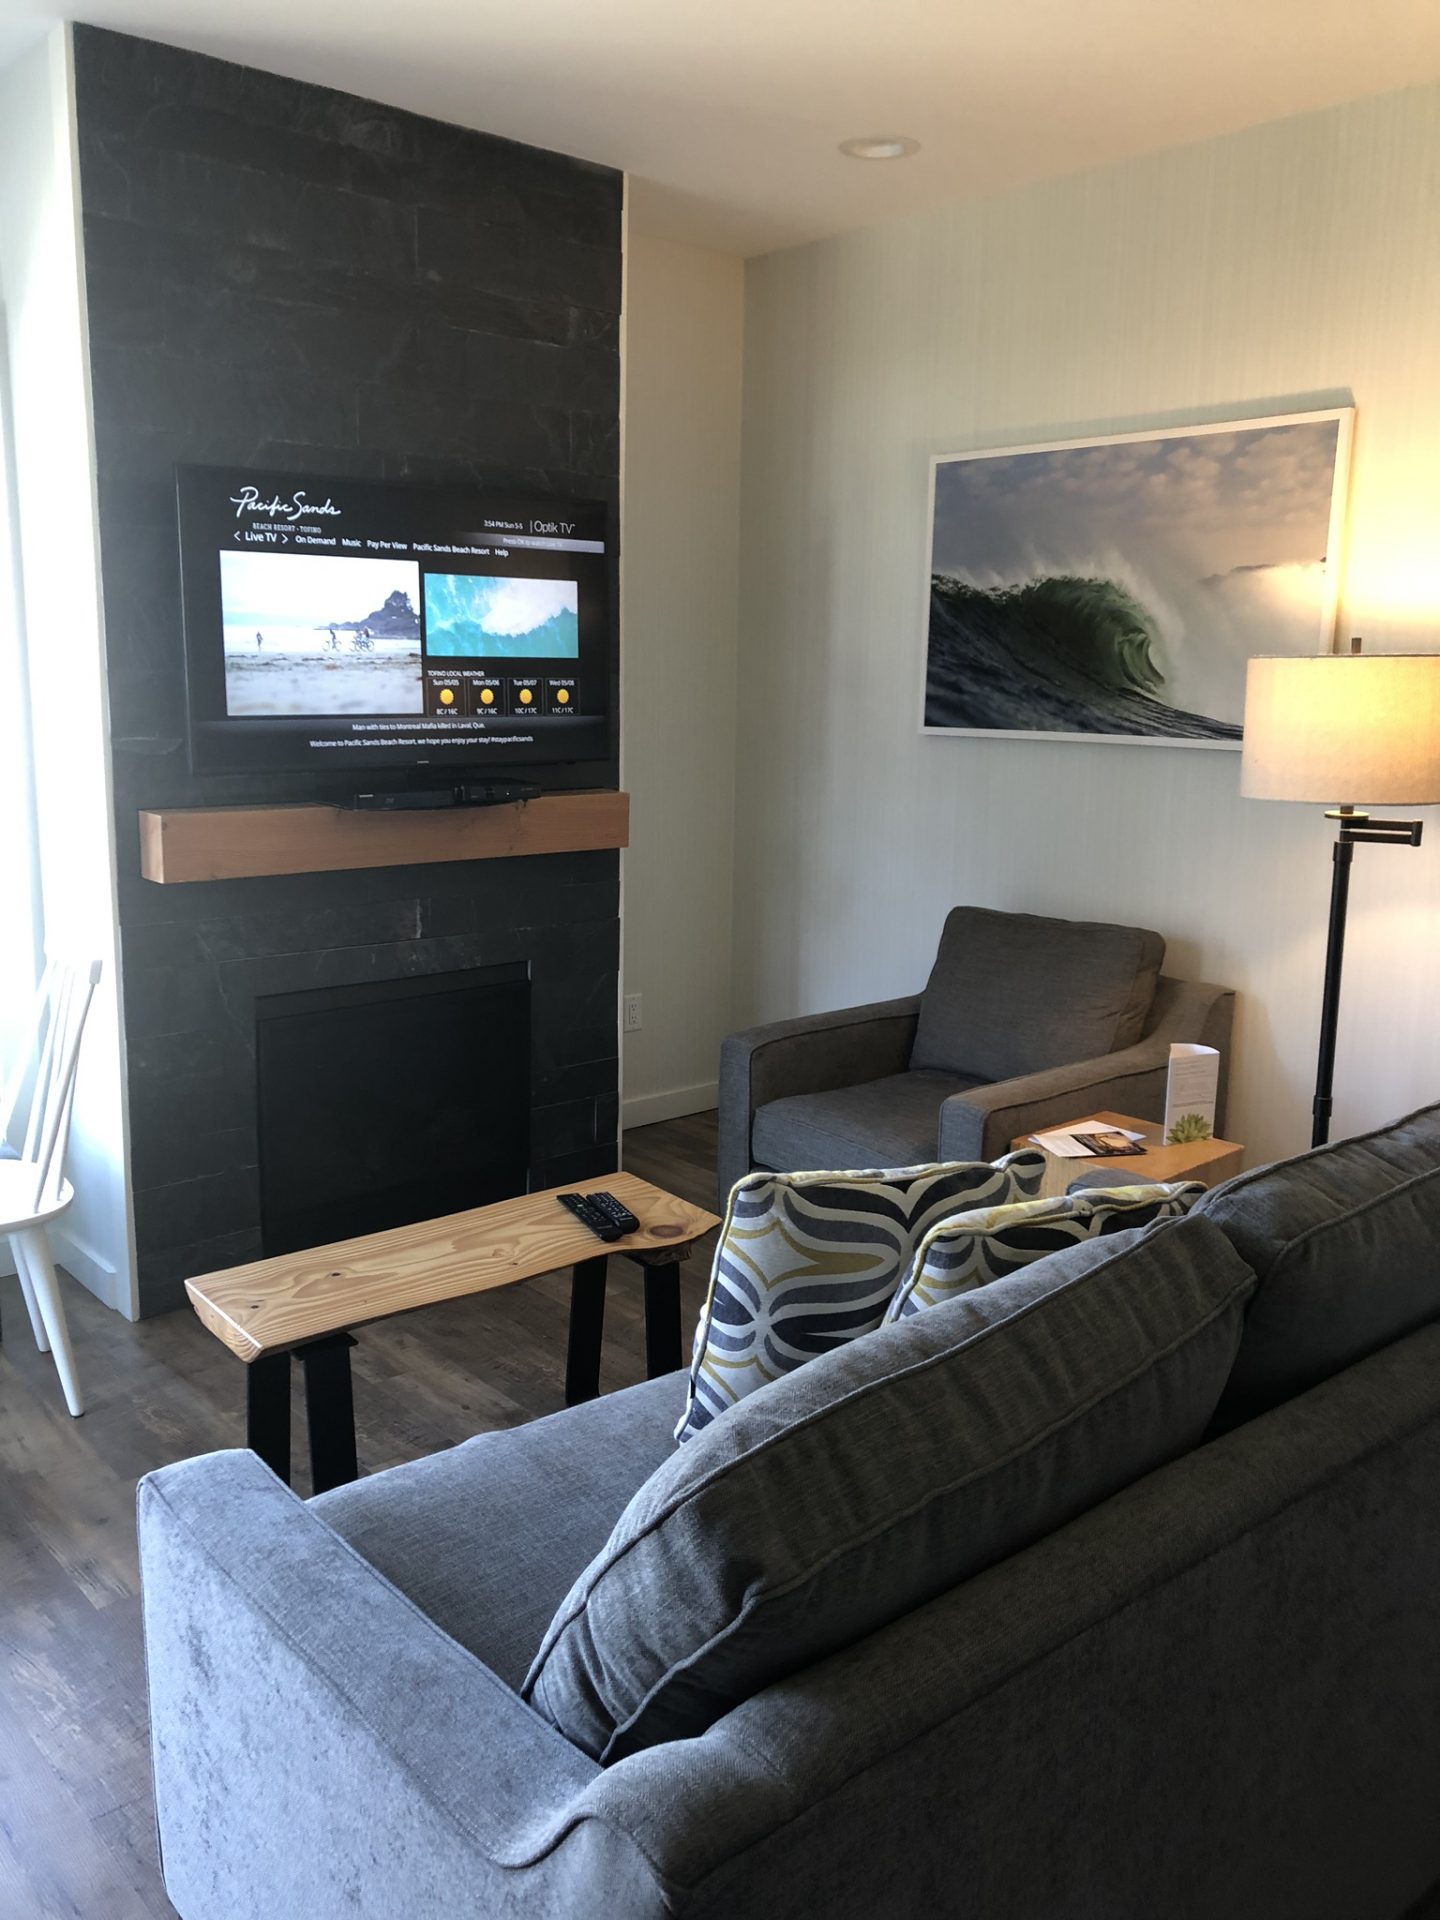 Living room at Pacific Sands Beach Resort, Tofino